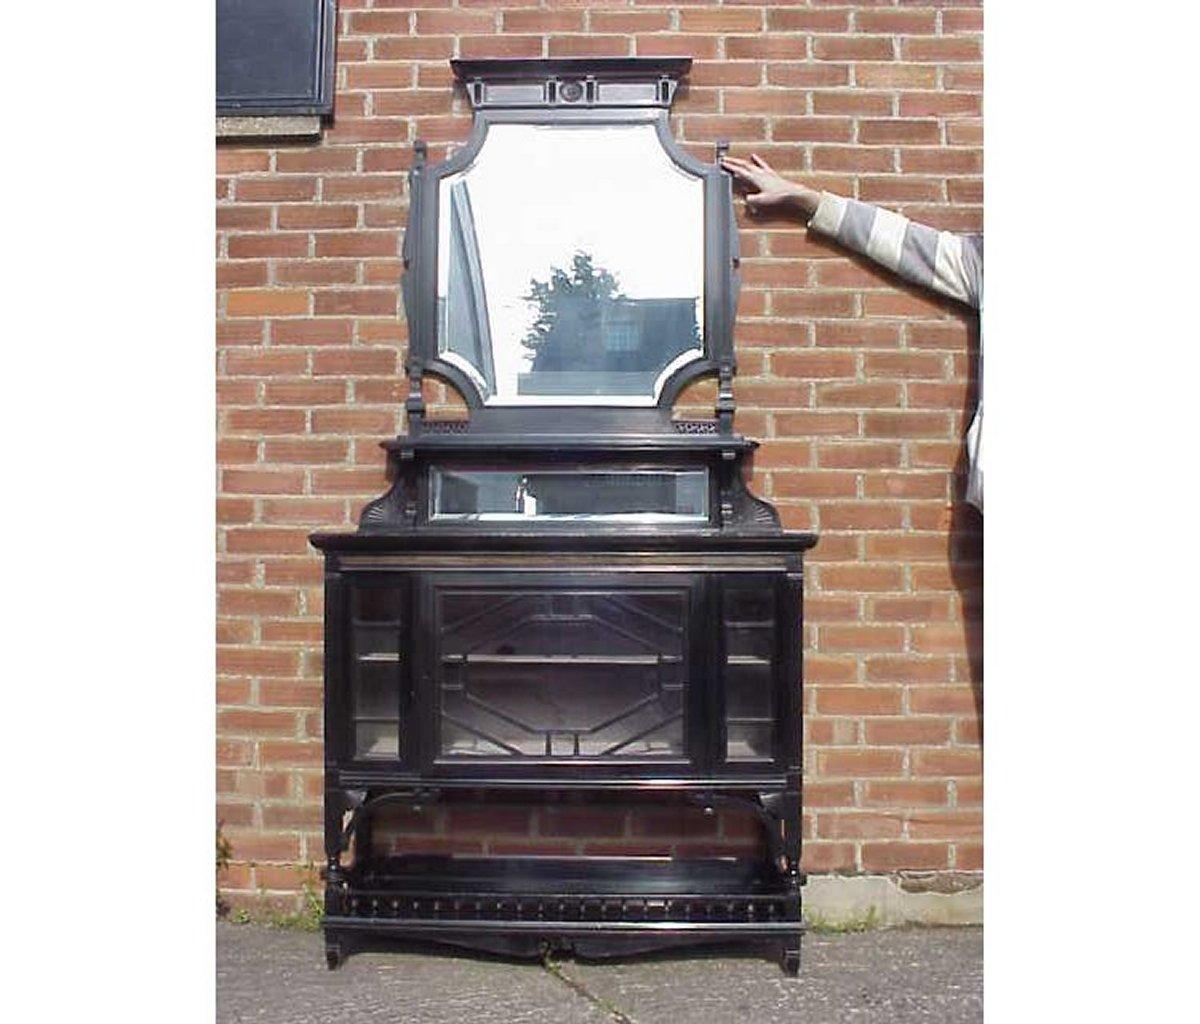 Lamb of Manchester, an Aesthetic Movement ebonised and coromandel side cabinet, with a bevelled mirrored and shelved back, a glazed base with a spindle galleried undershelf, stamped to top edge of door.
Possibly designed by W. J. Estall. Lambs were